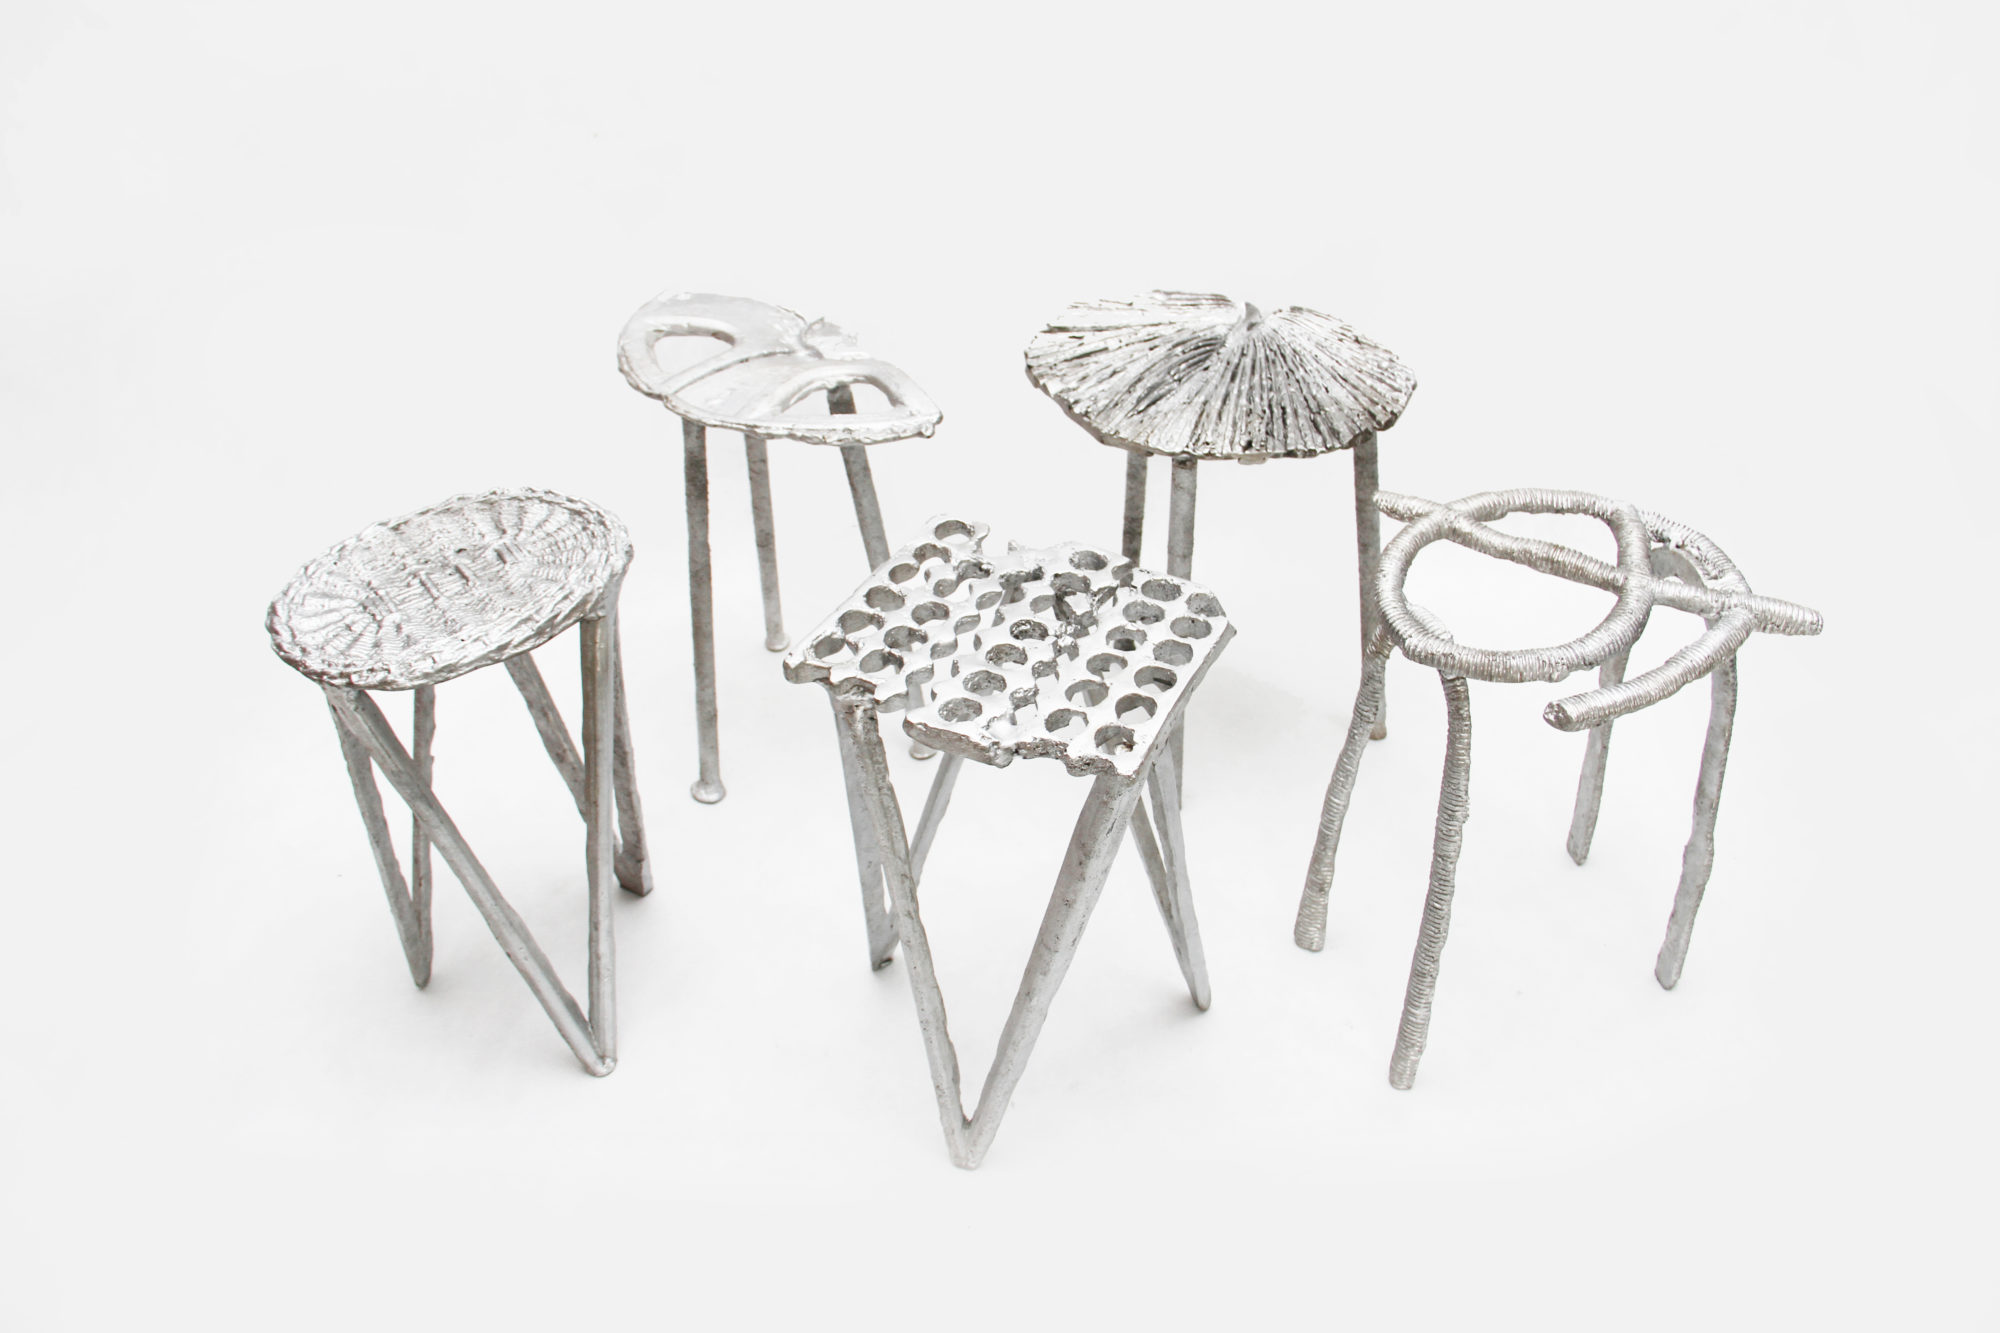 stools cast from aluminum cans